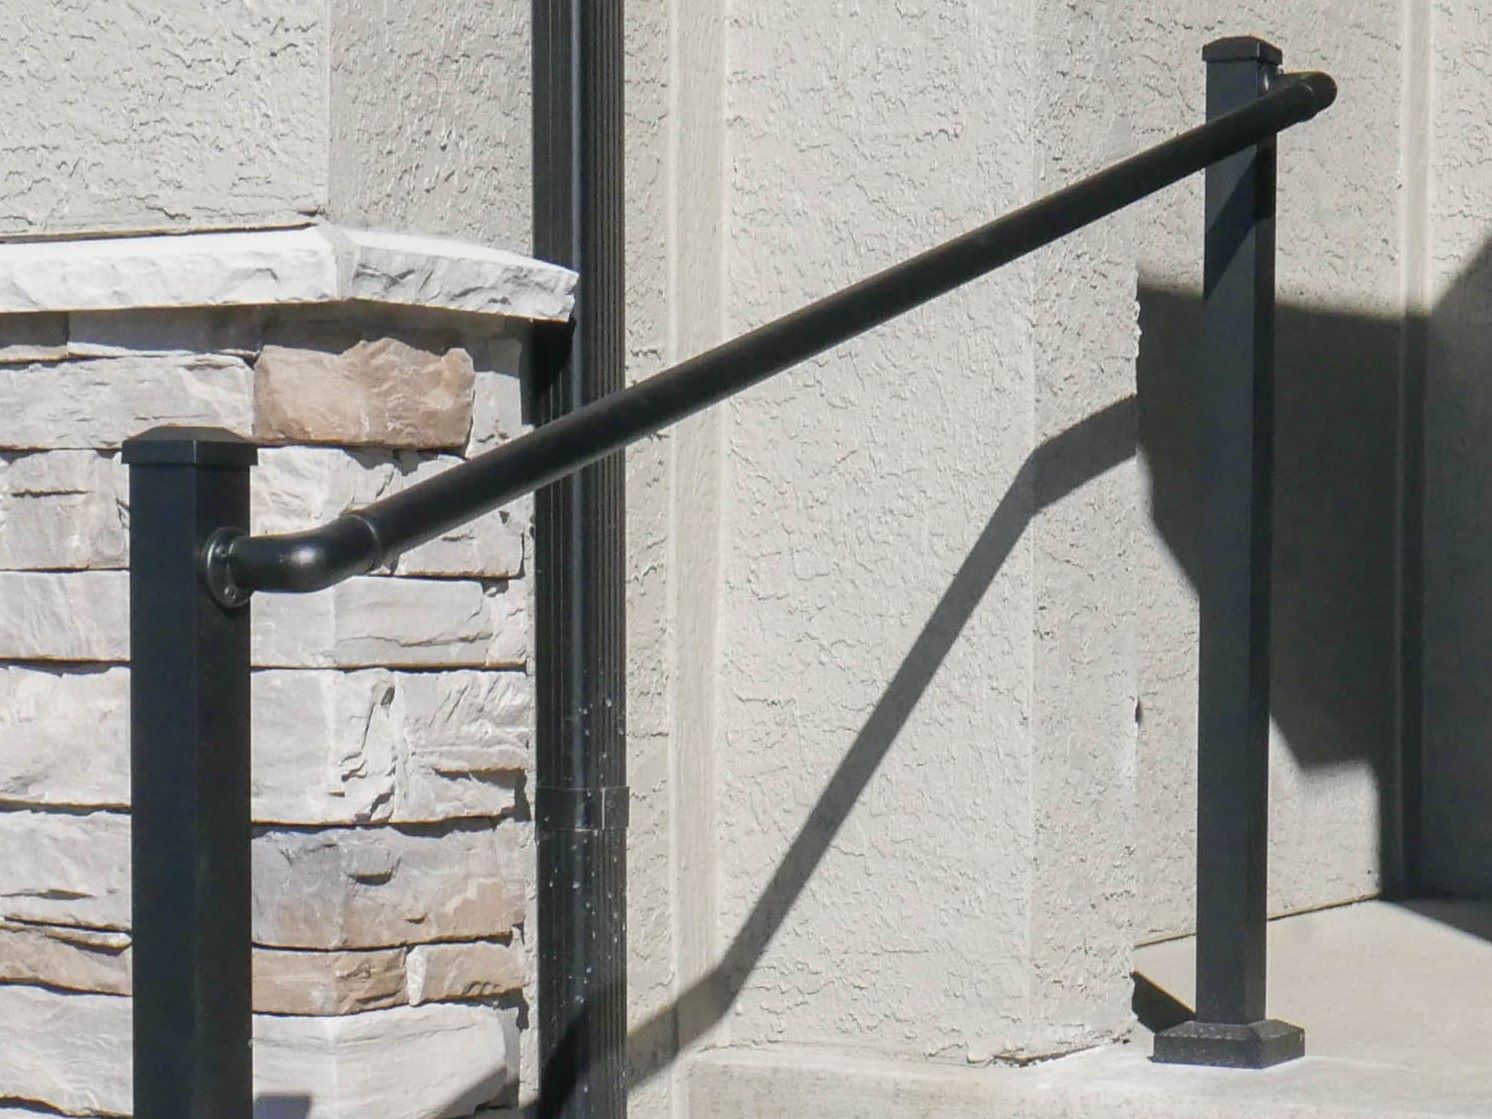 Black CHR between two posts and up a set of stairs